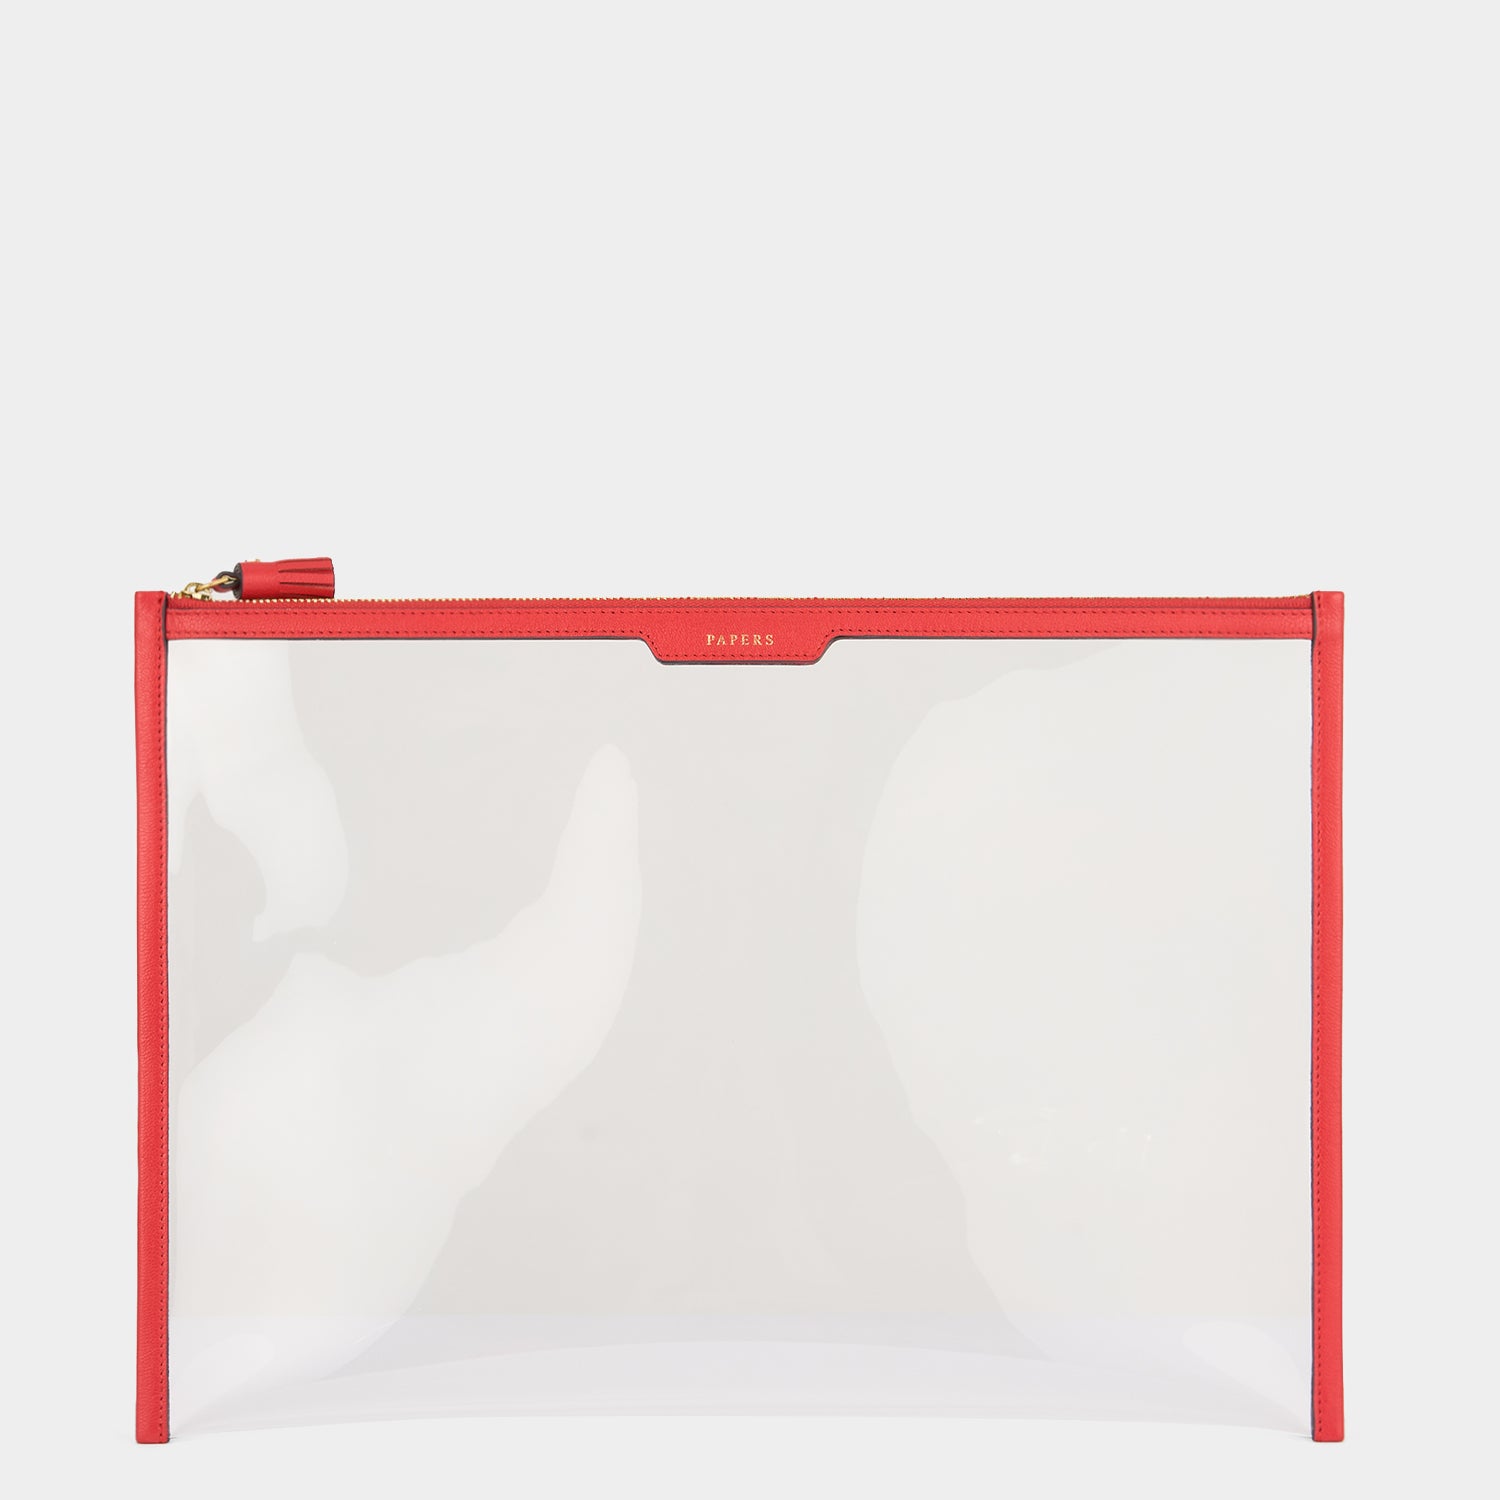 Papers Zip Sleeve -

                  
                    Capra Leather in Salmon/Clear -
                  

                  Anya Hindmarch US
